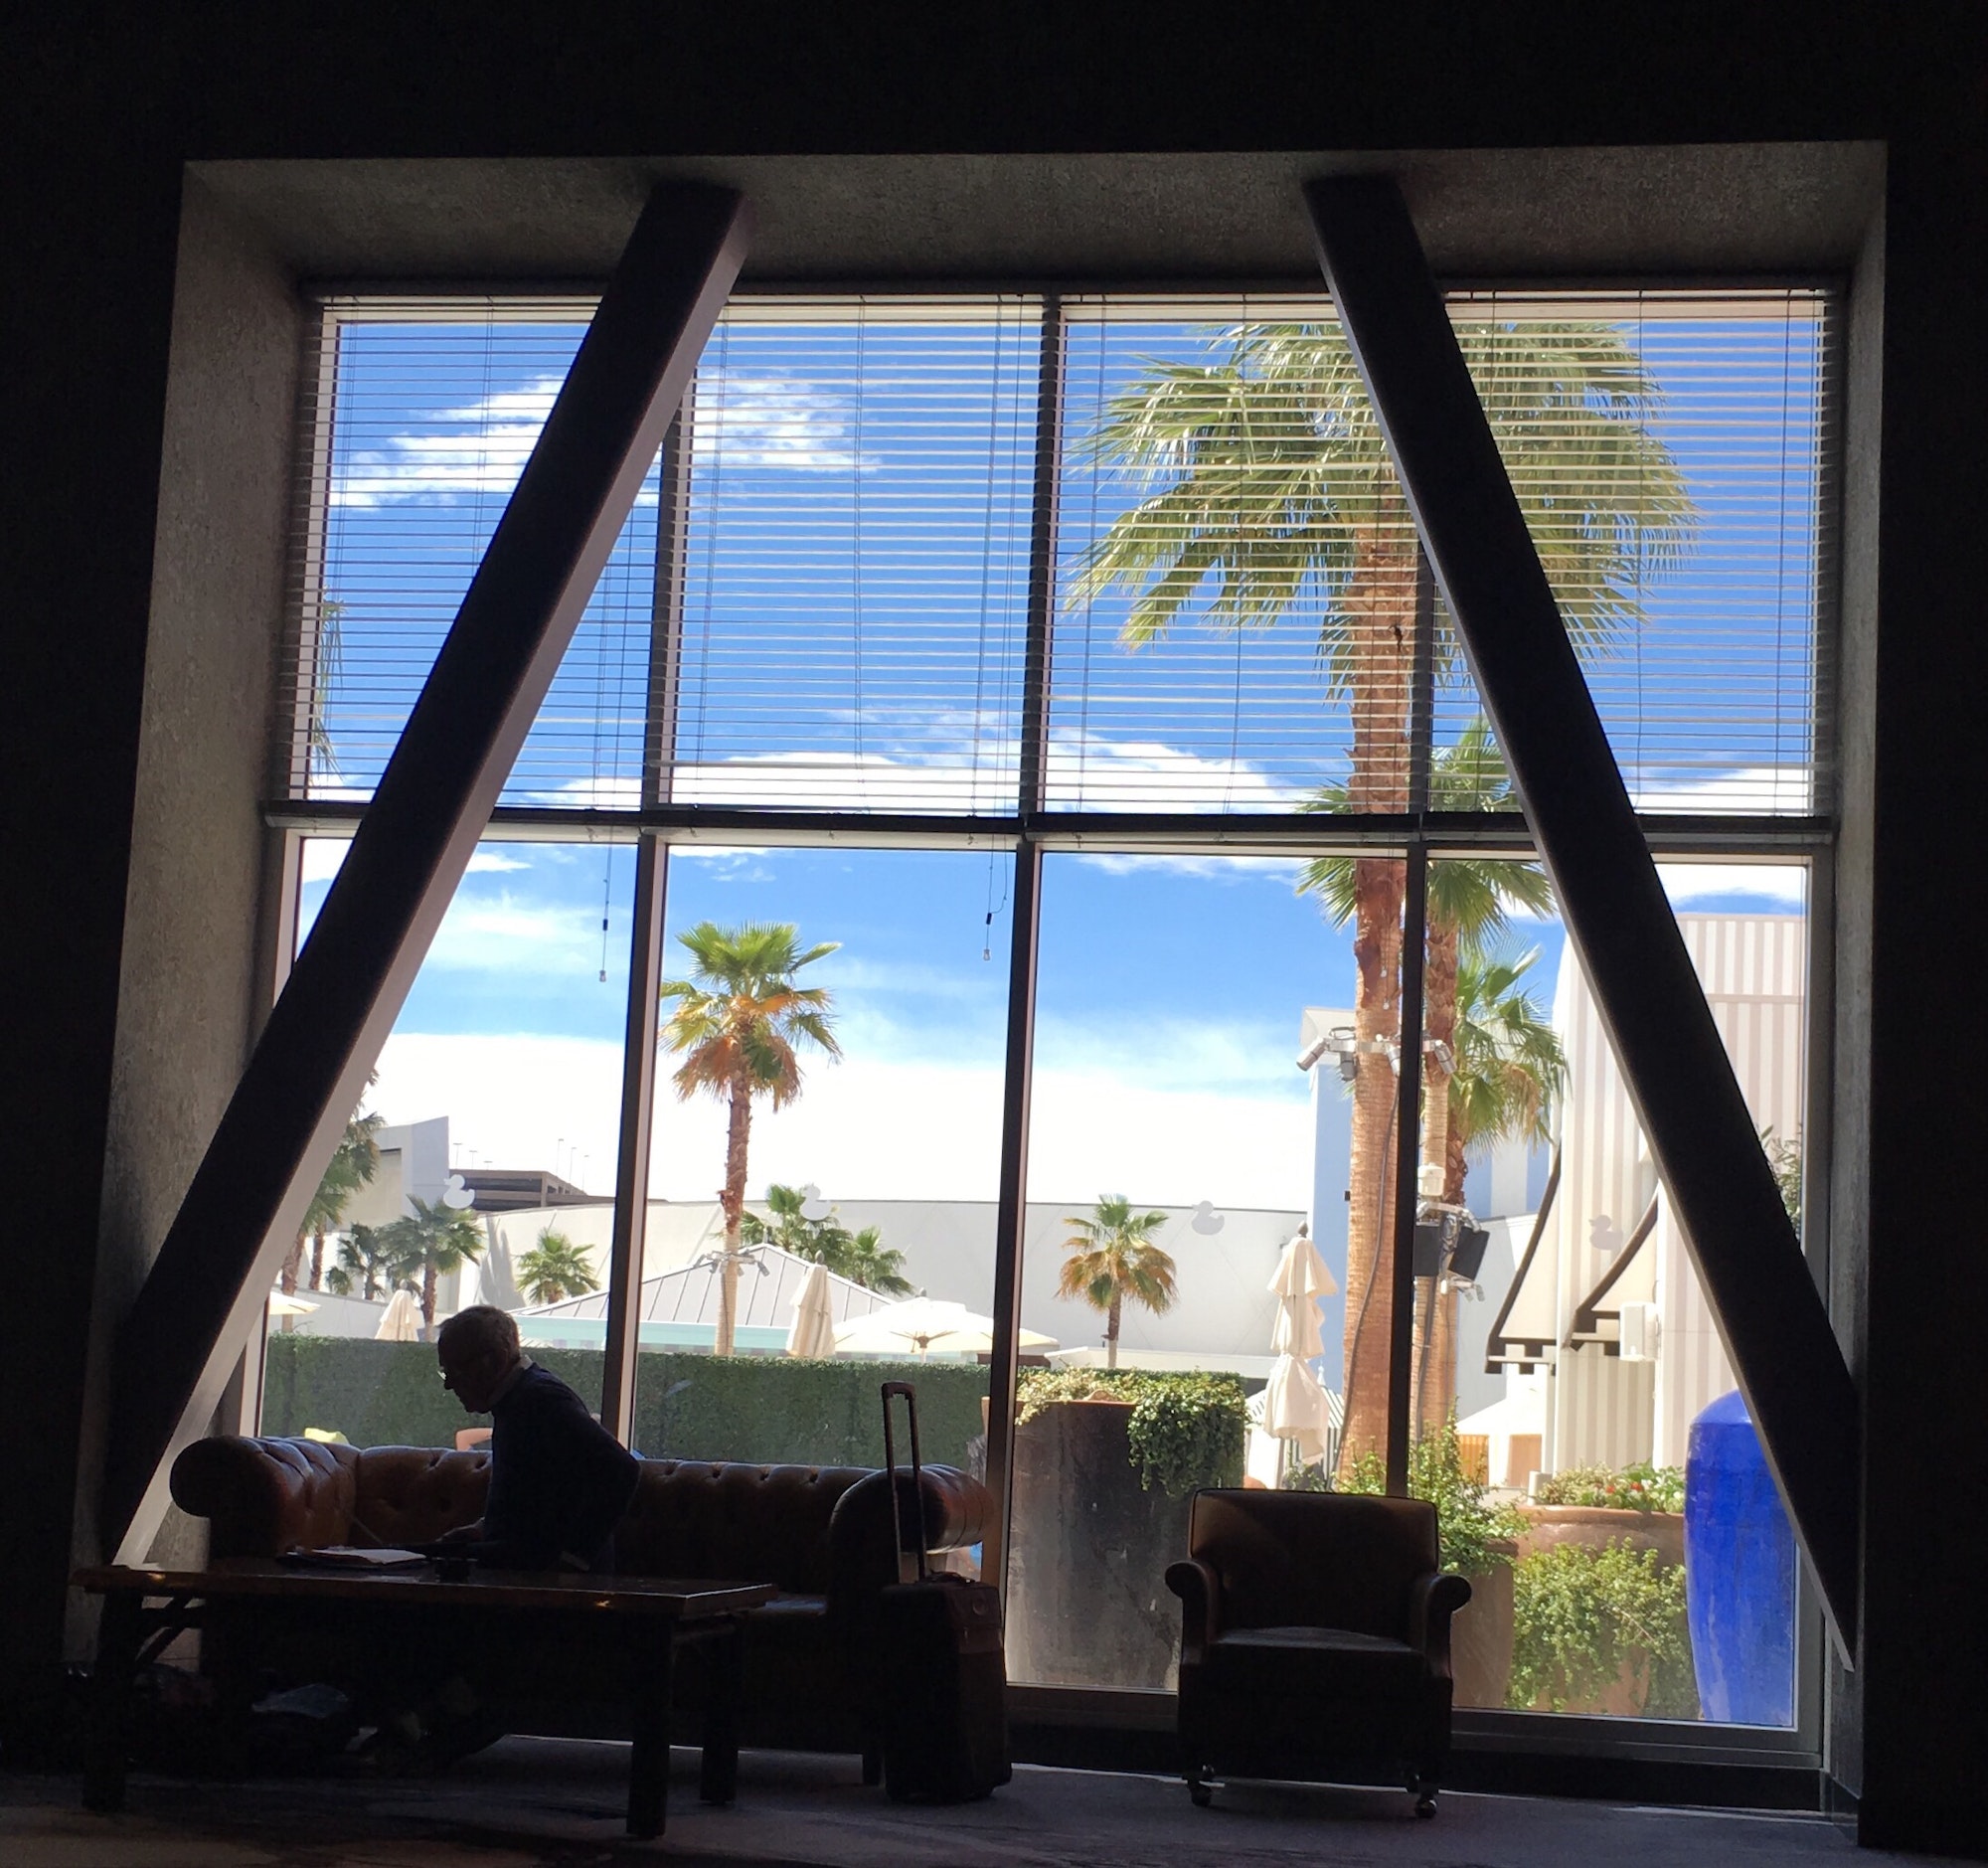 Working inside when there is sun and palm trees outside